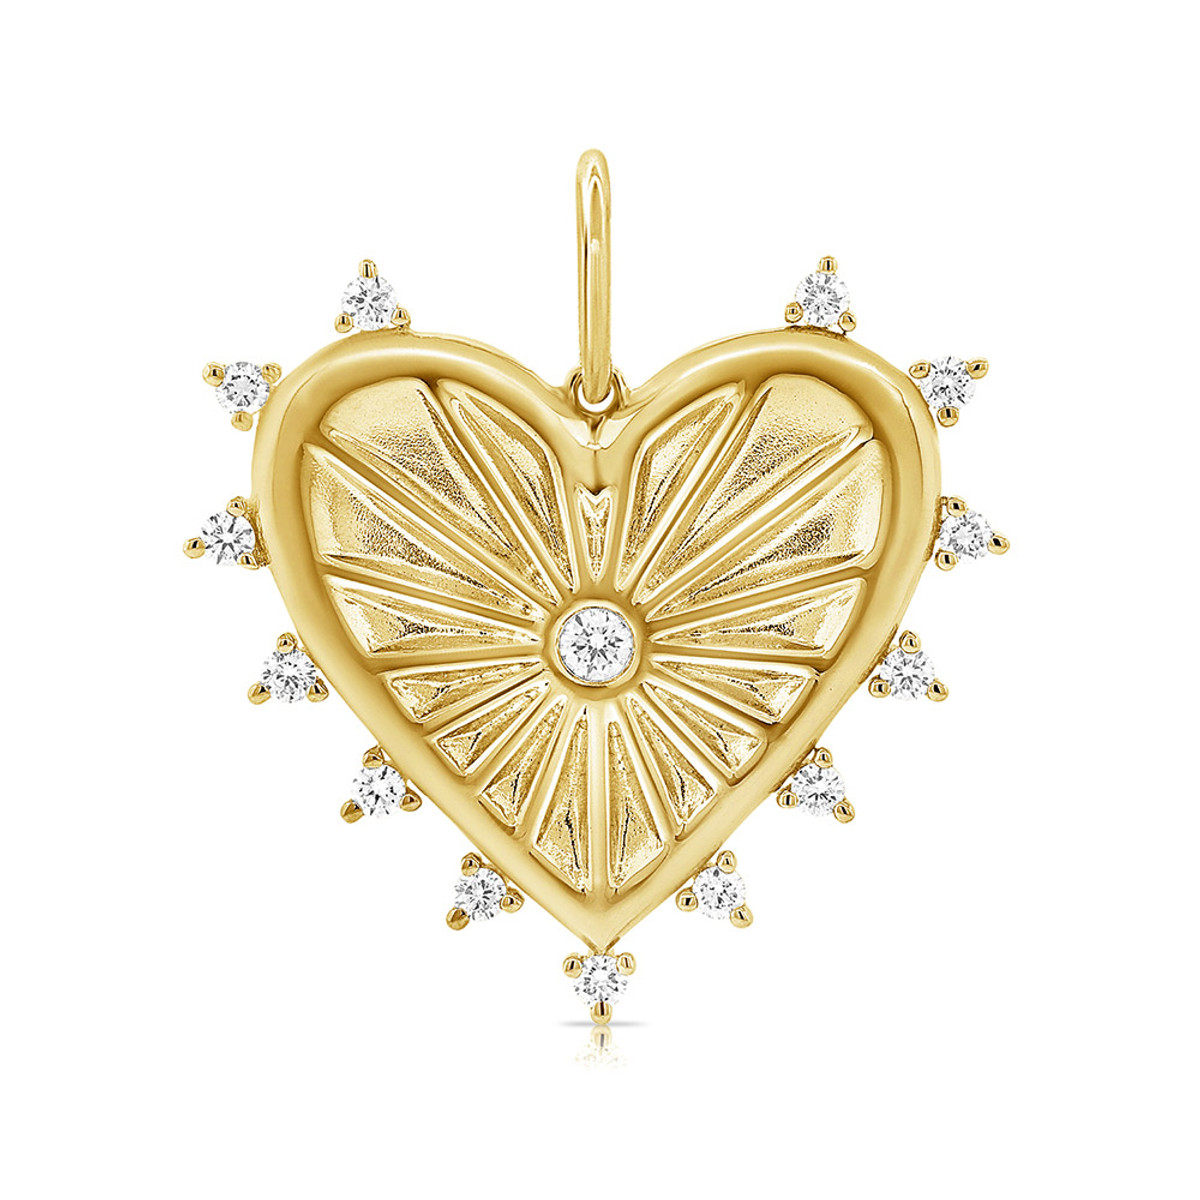 Hyde Park 14KT Yellow Gold Large Fluted Heart Charm-26243